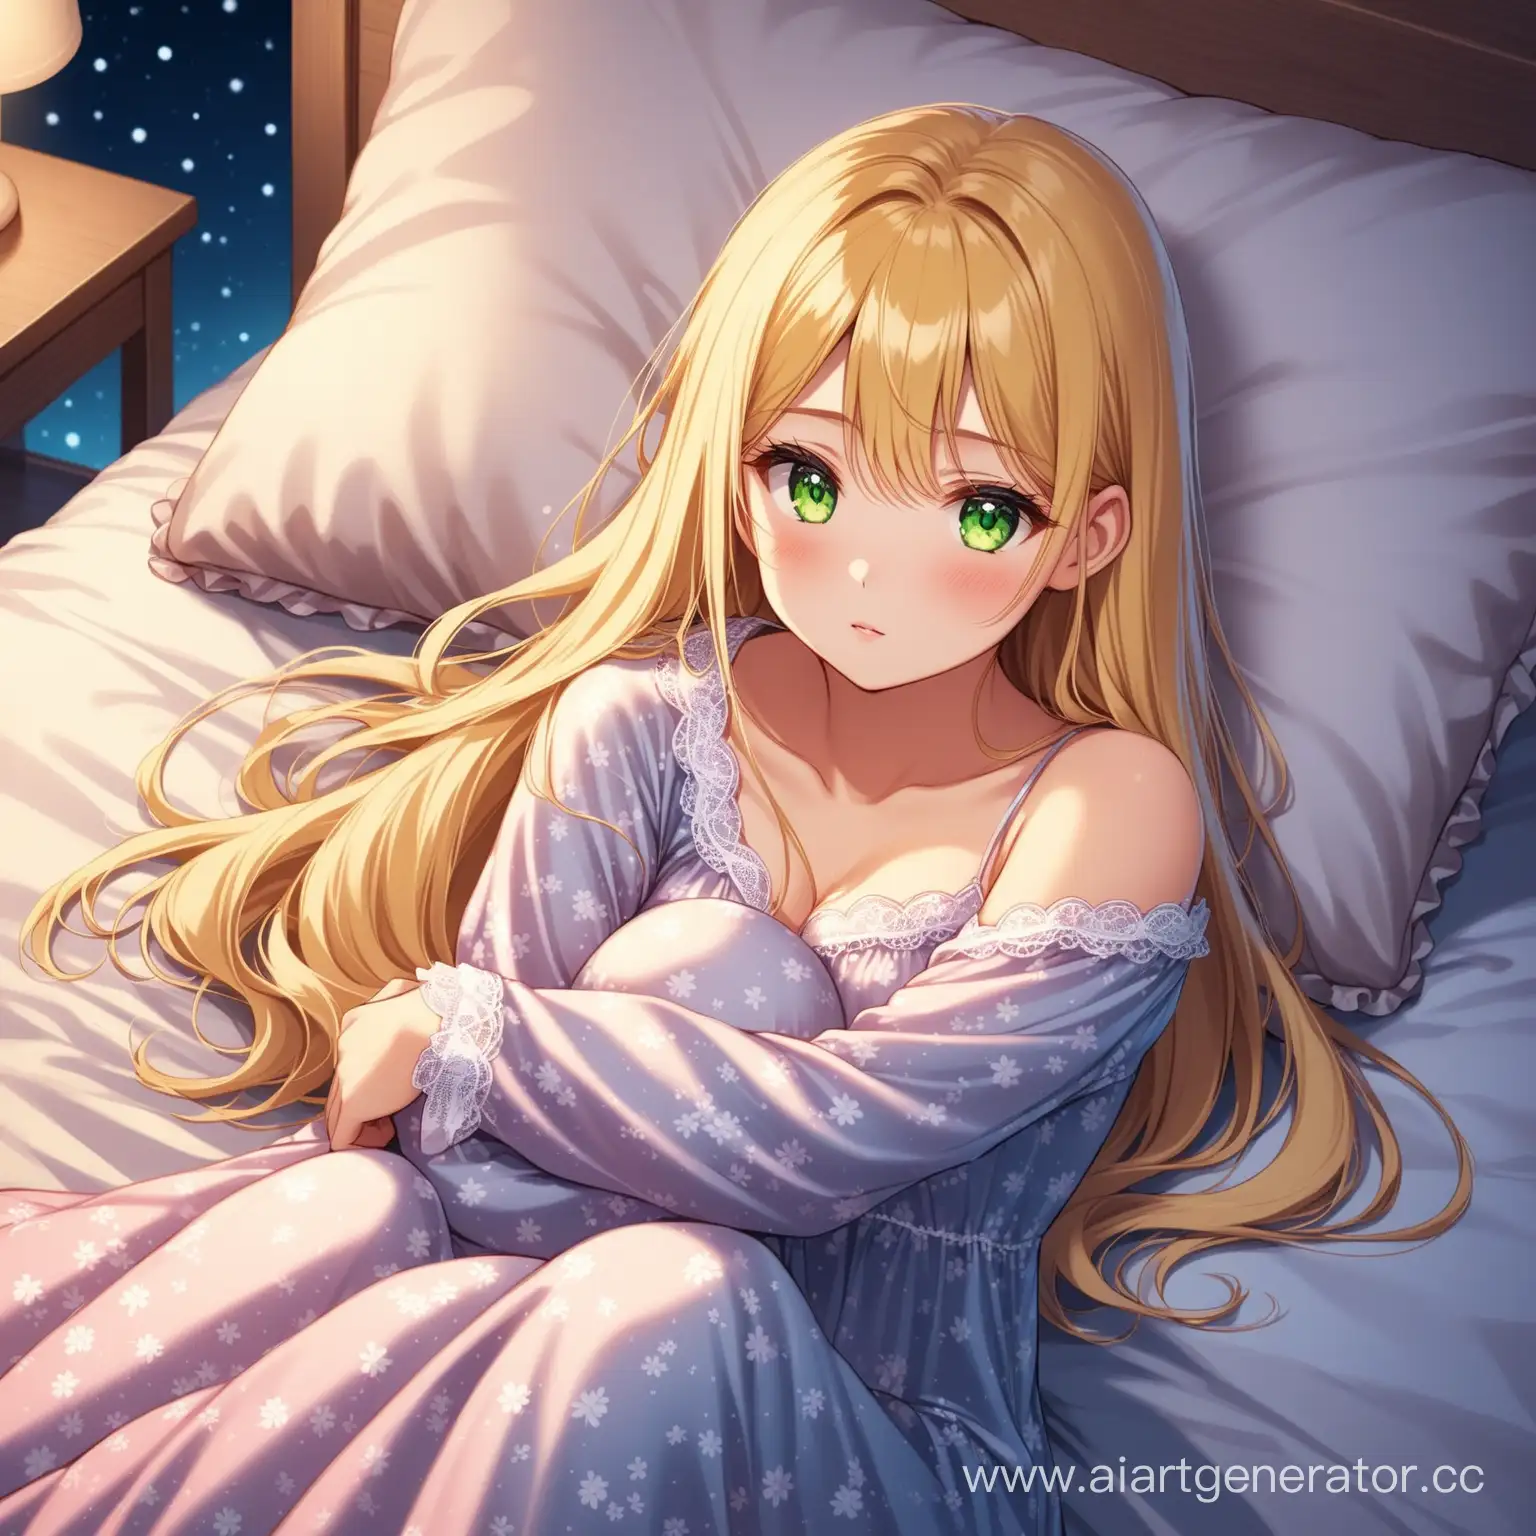 girl has a beautiful appearance, long blonde hair and big green eyes, she is dressed in a beautiful nightgown pajamas, She lies on the bed and hugs the pillow, the night atmosphere